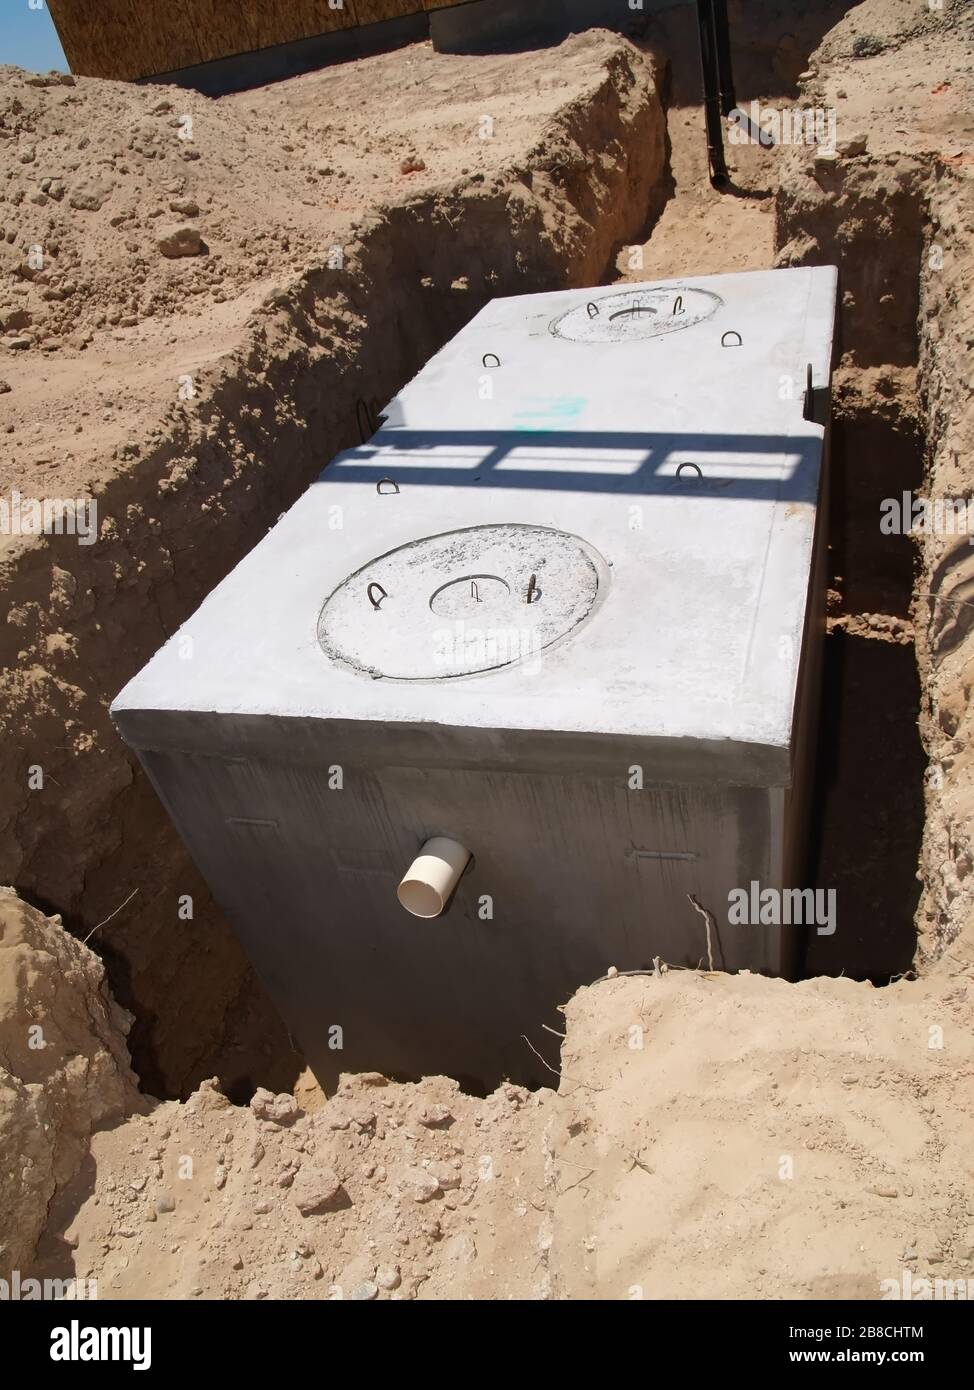 A brand new septic tank ready to be connected to a newly constructed home and then covered with soil to hide it from view. Located in Arizona. Stock Photo